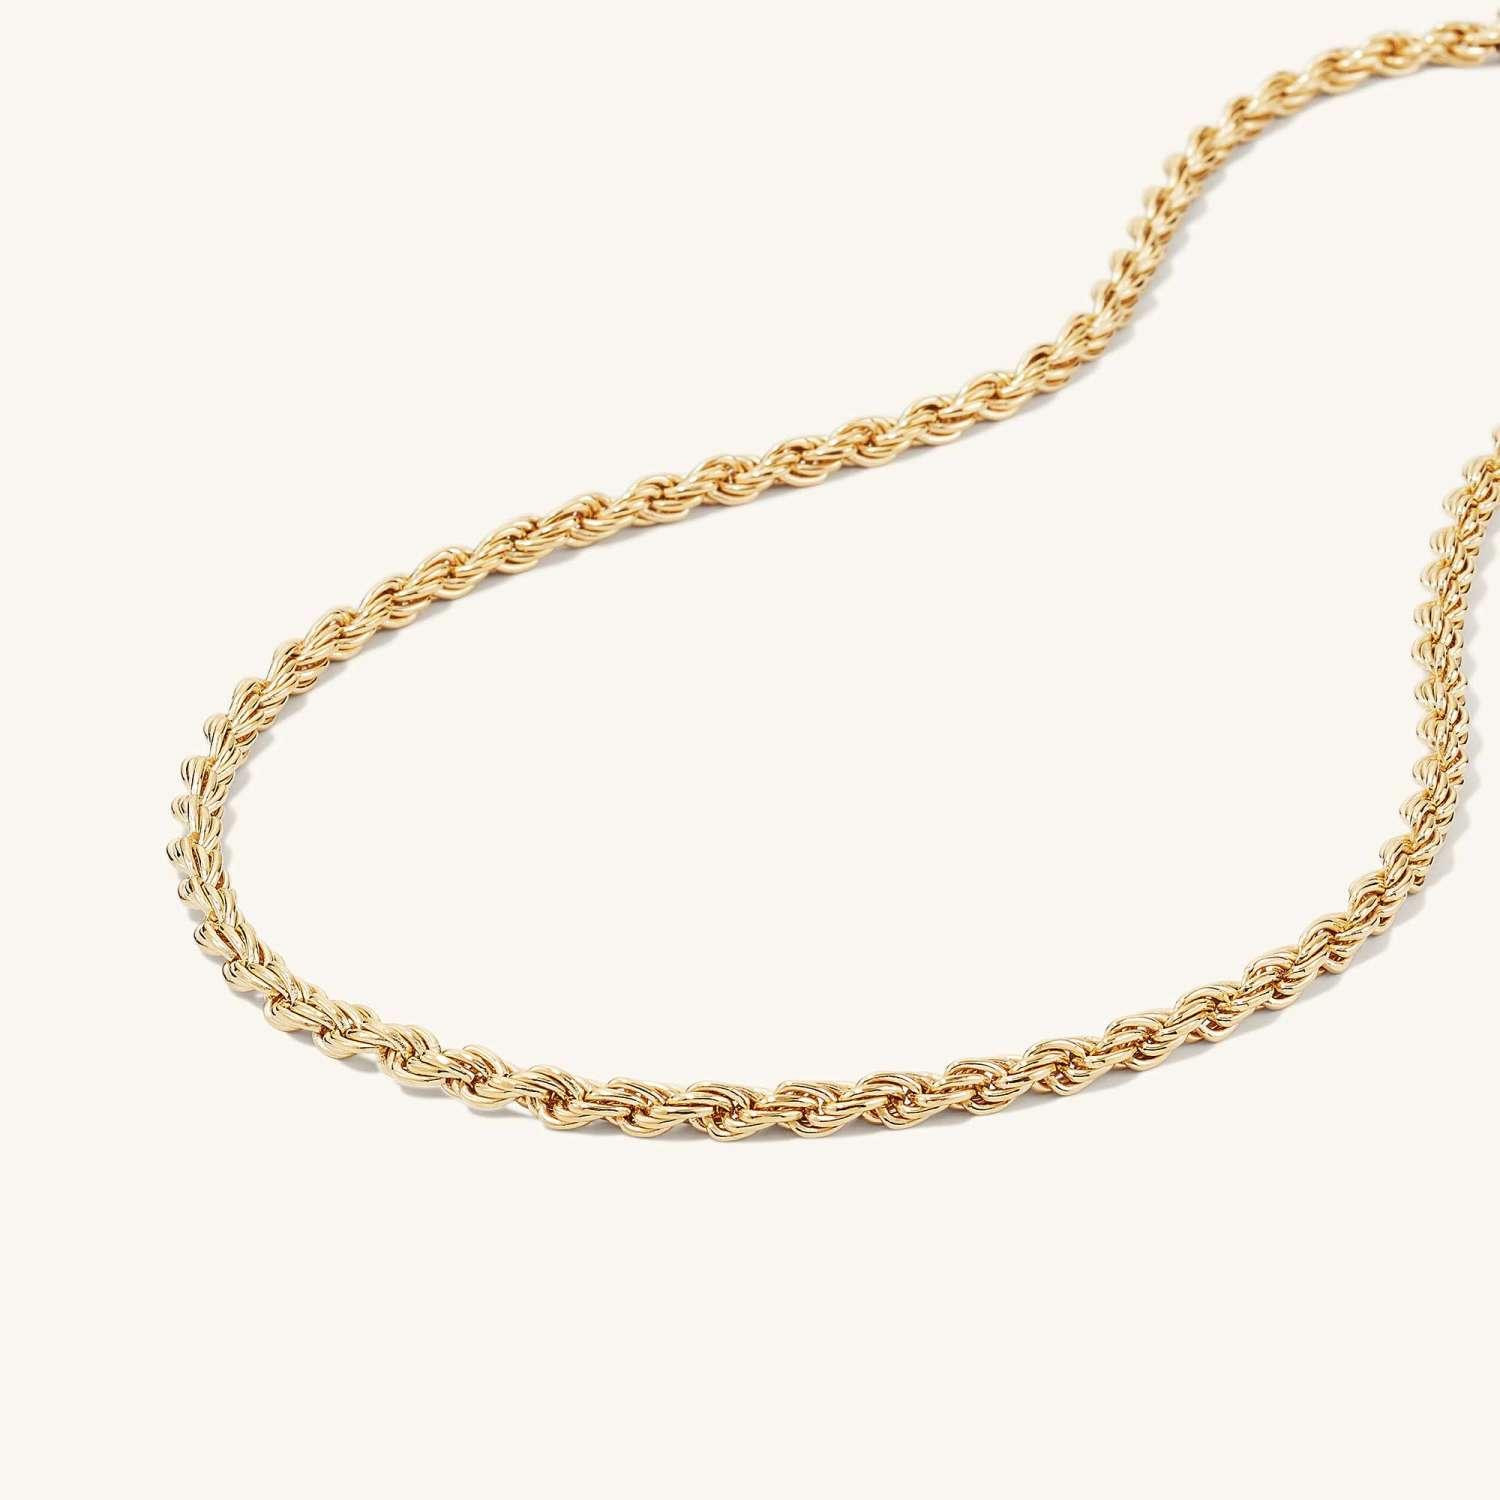 Mejuri 14K Yellow Gold Chain Necklaces: Baby Box Chain Necklace